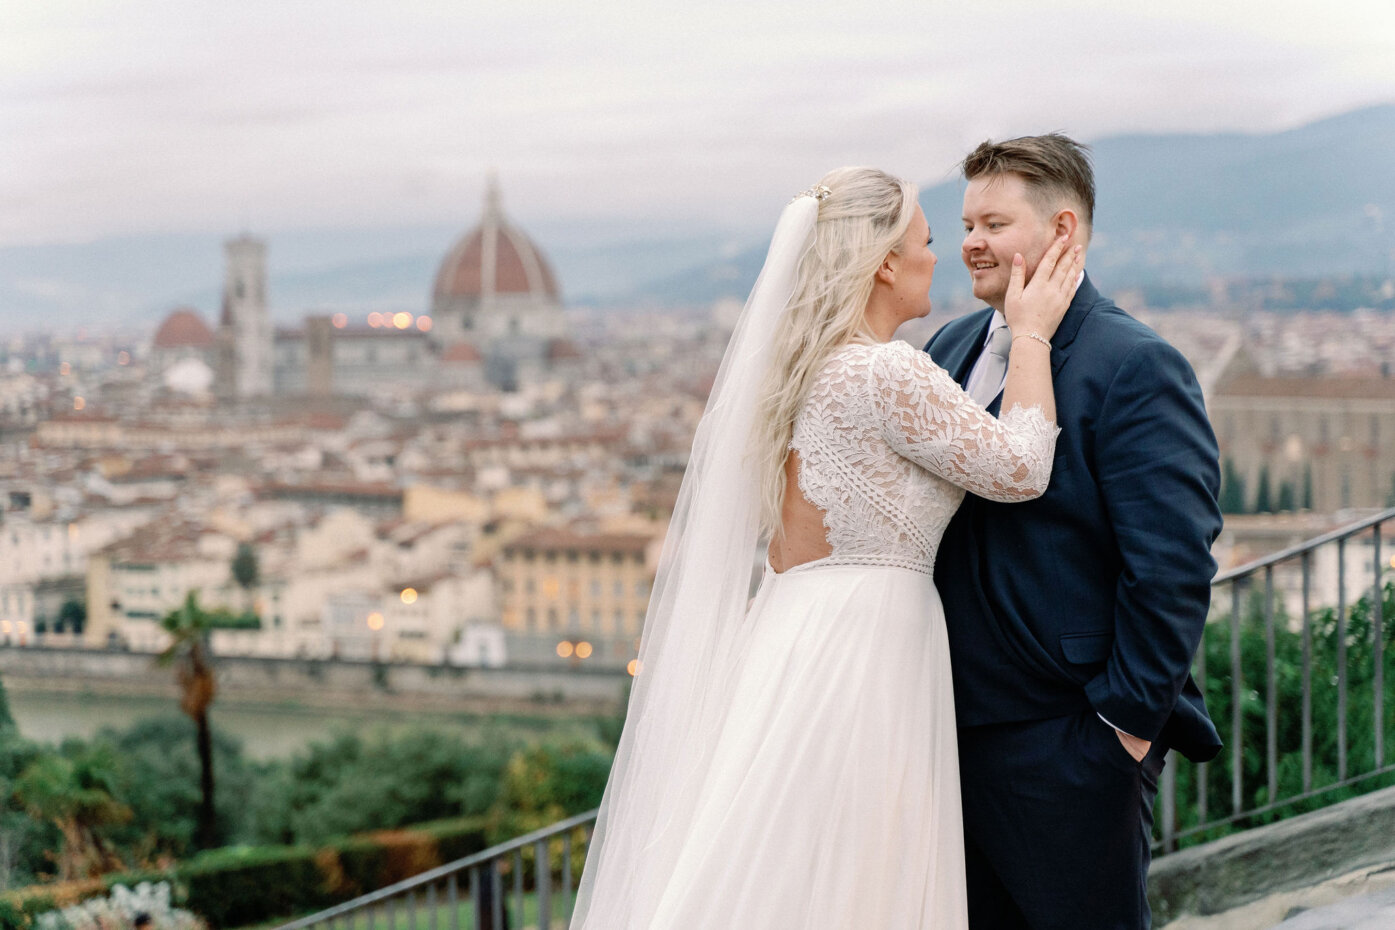 This couple's cool November wedding portraits overlooking Florence, Italy